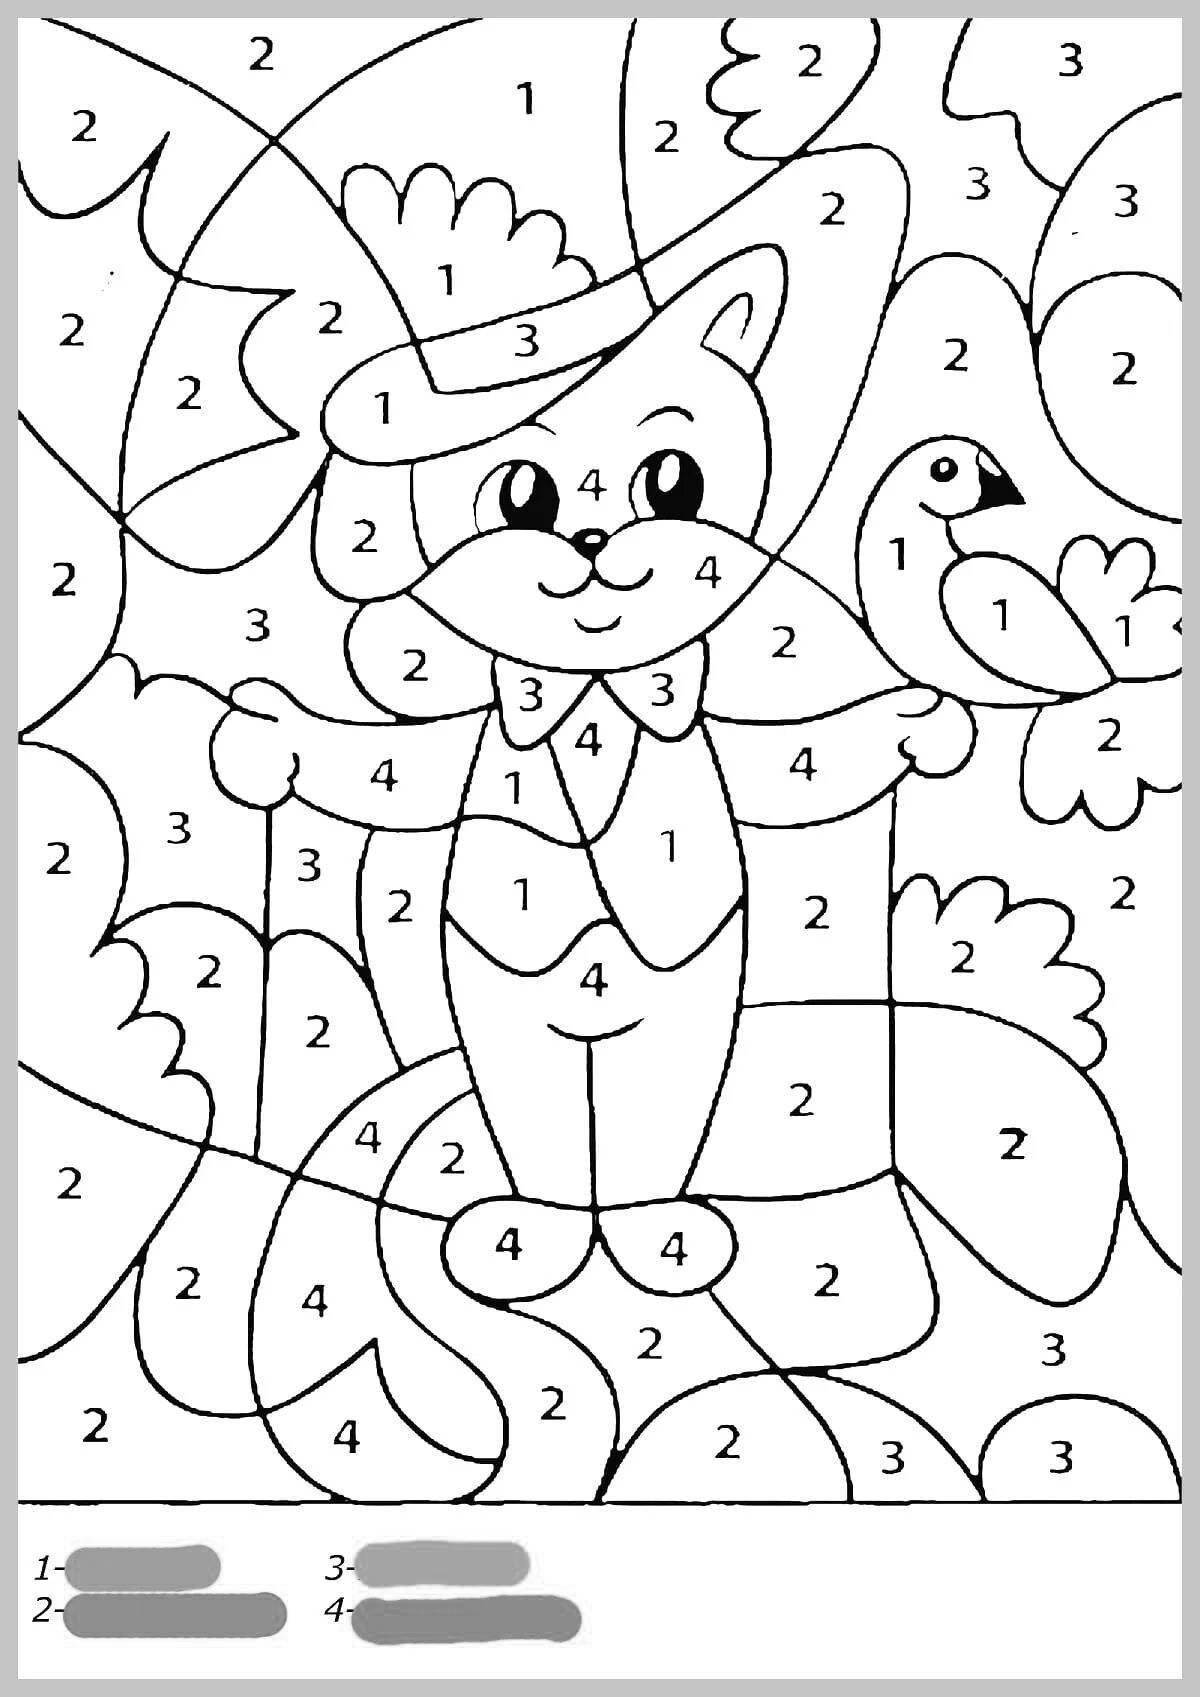 Fun coloring by numbers 5 years old